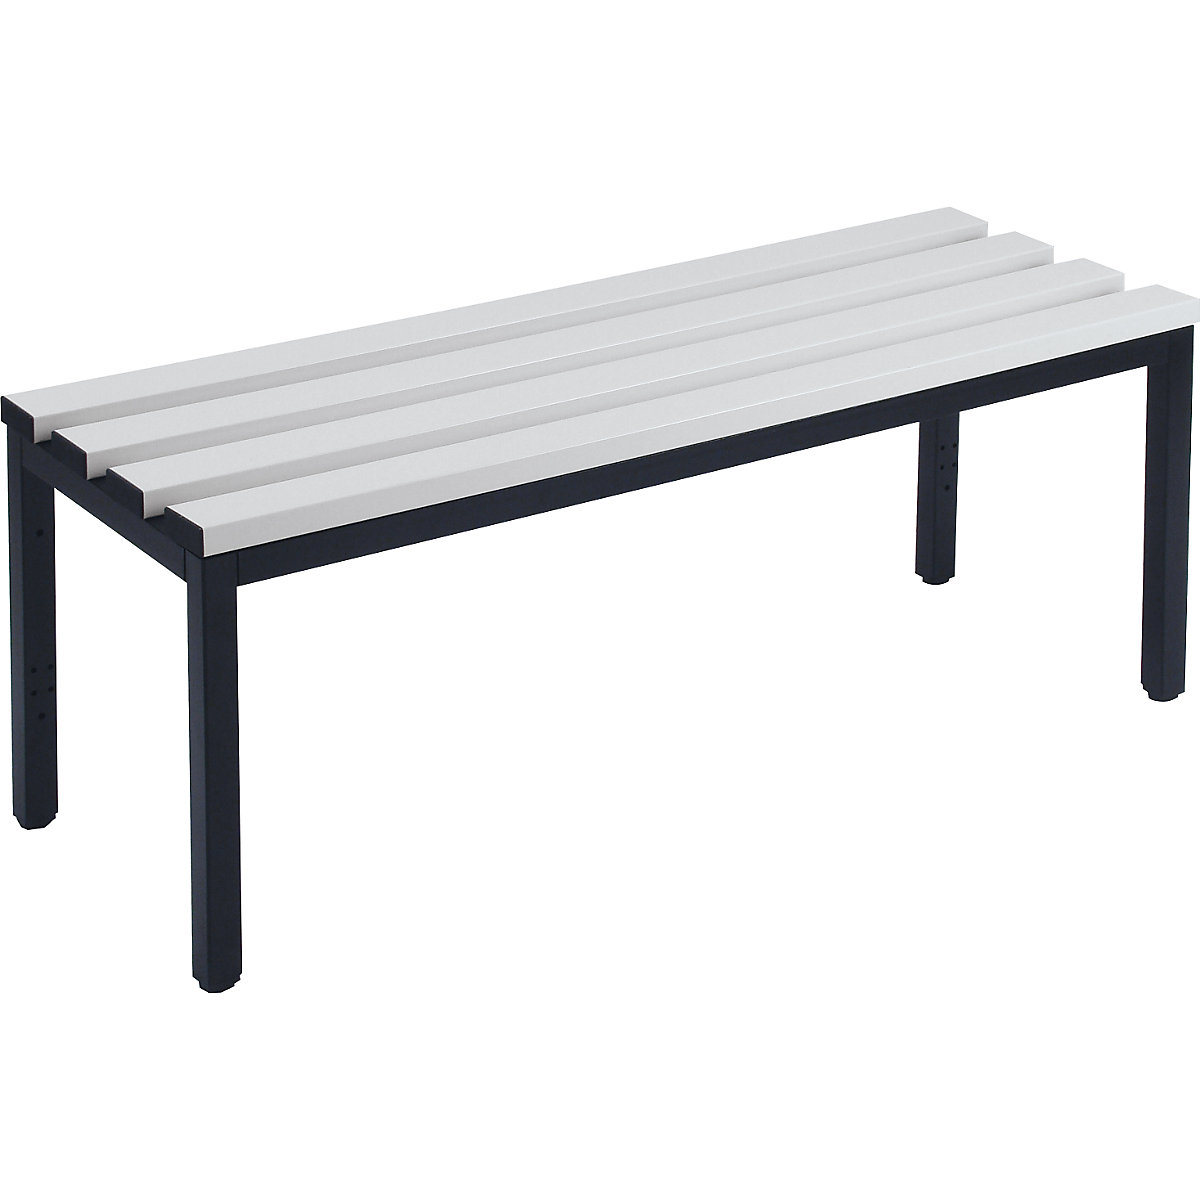 Wolf – Cloakroom bench without back rest